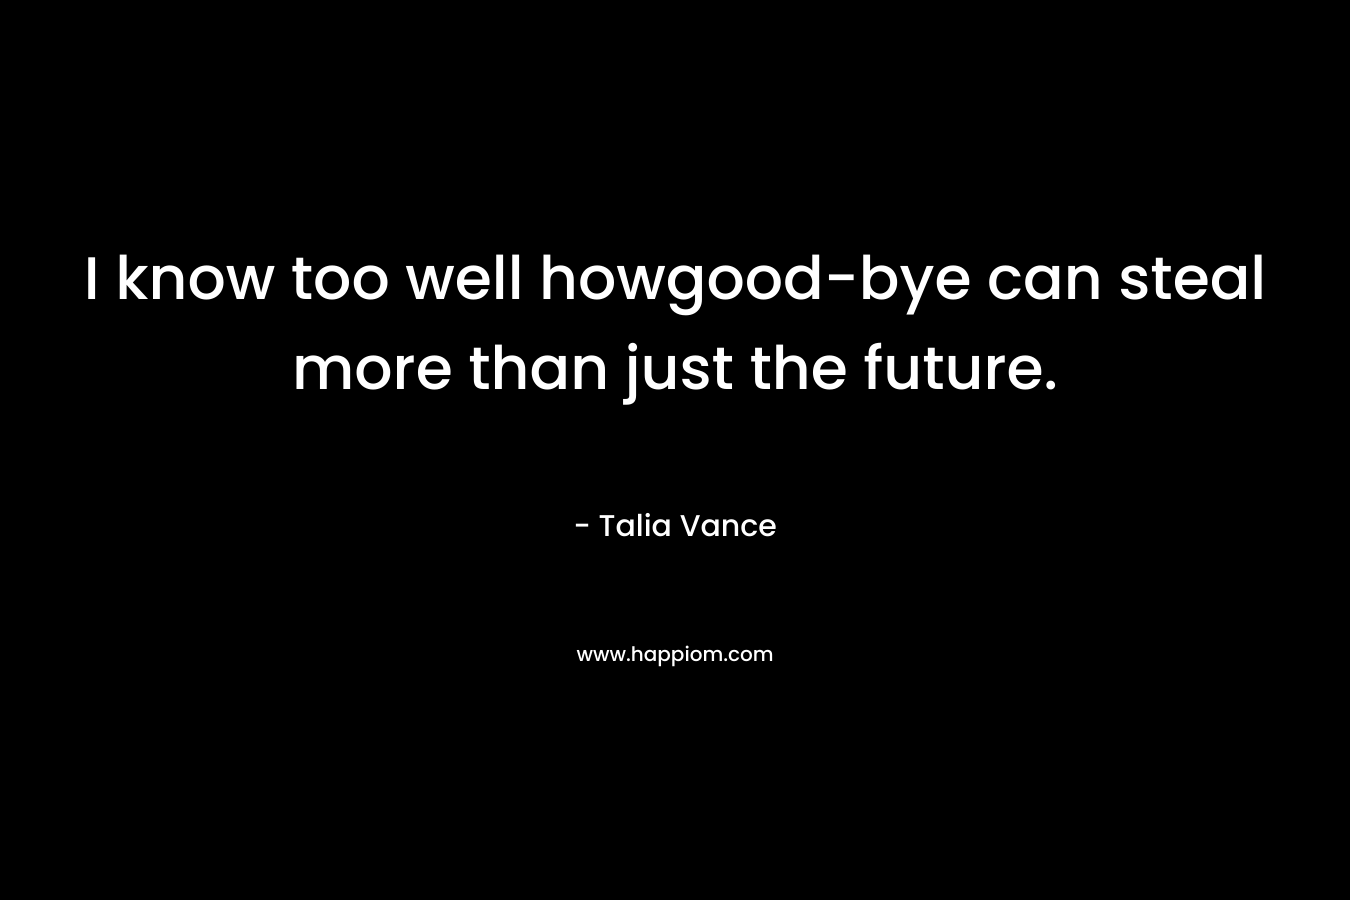 I know too well howgood-bye can steal more than just the future.